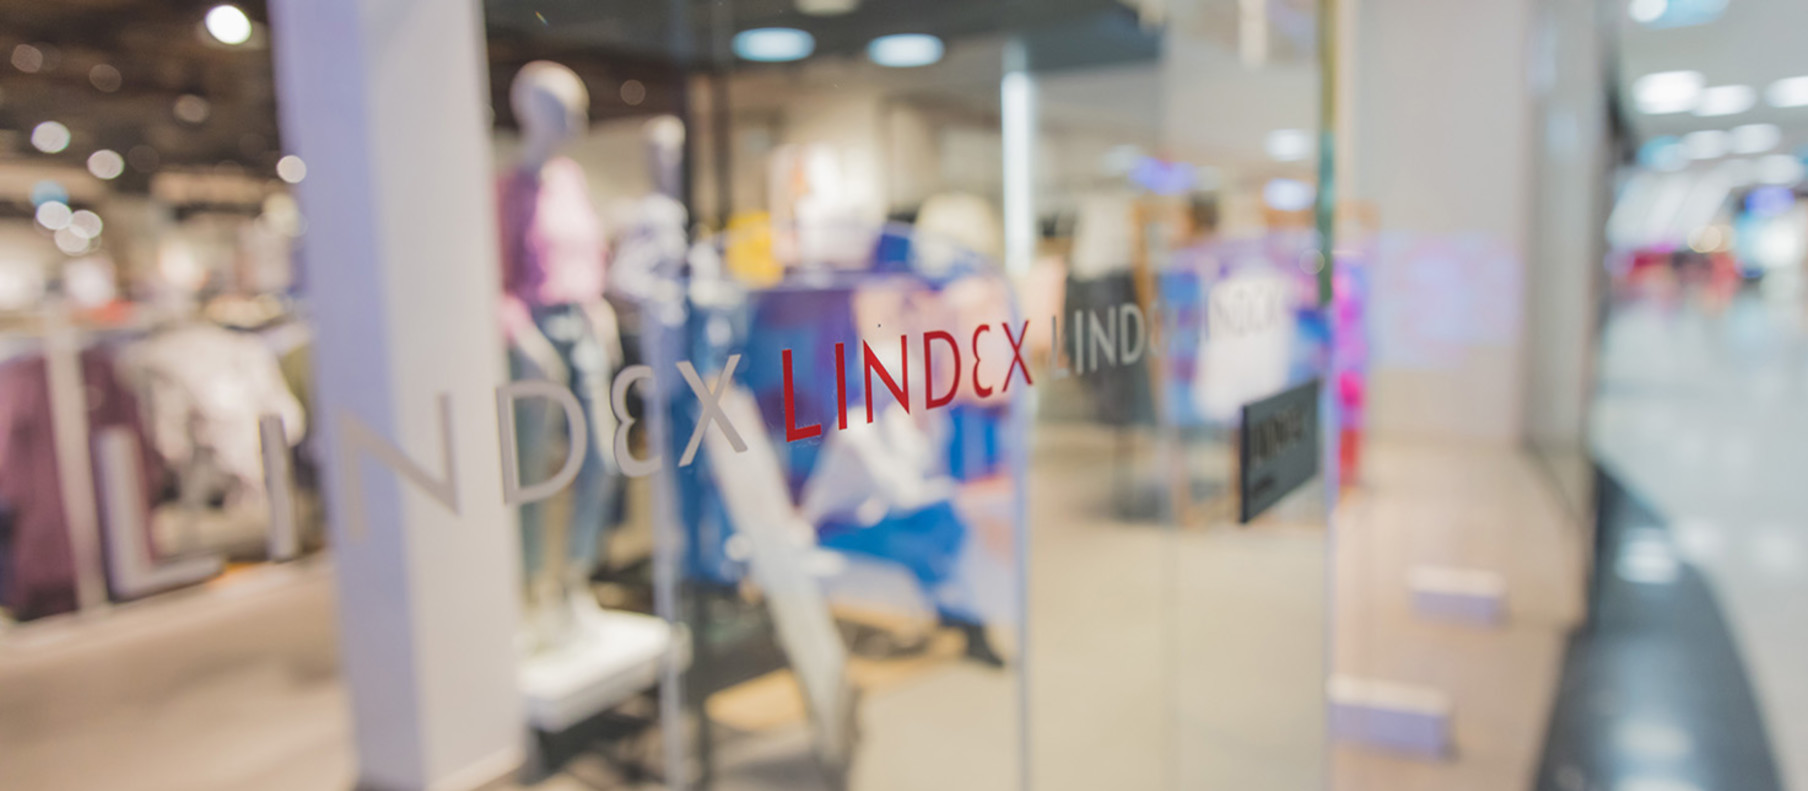 Stockmann could change its name to Lindex Group